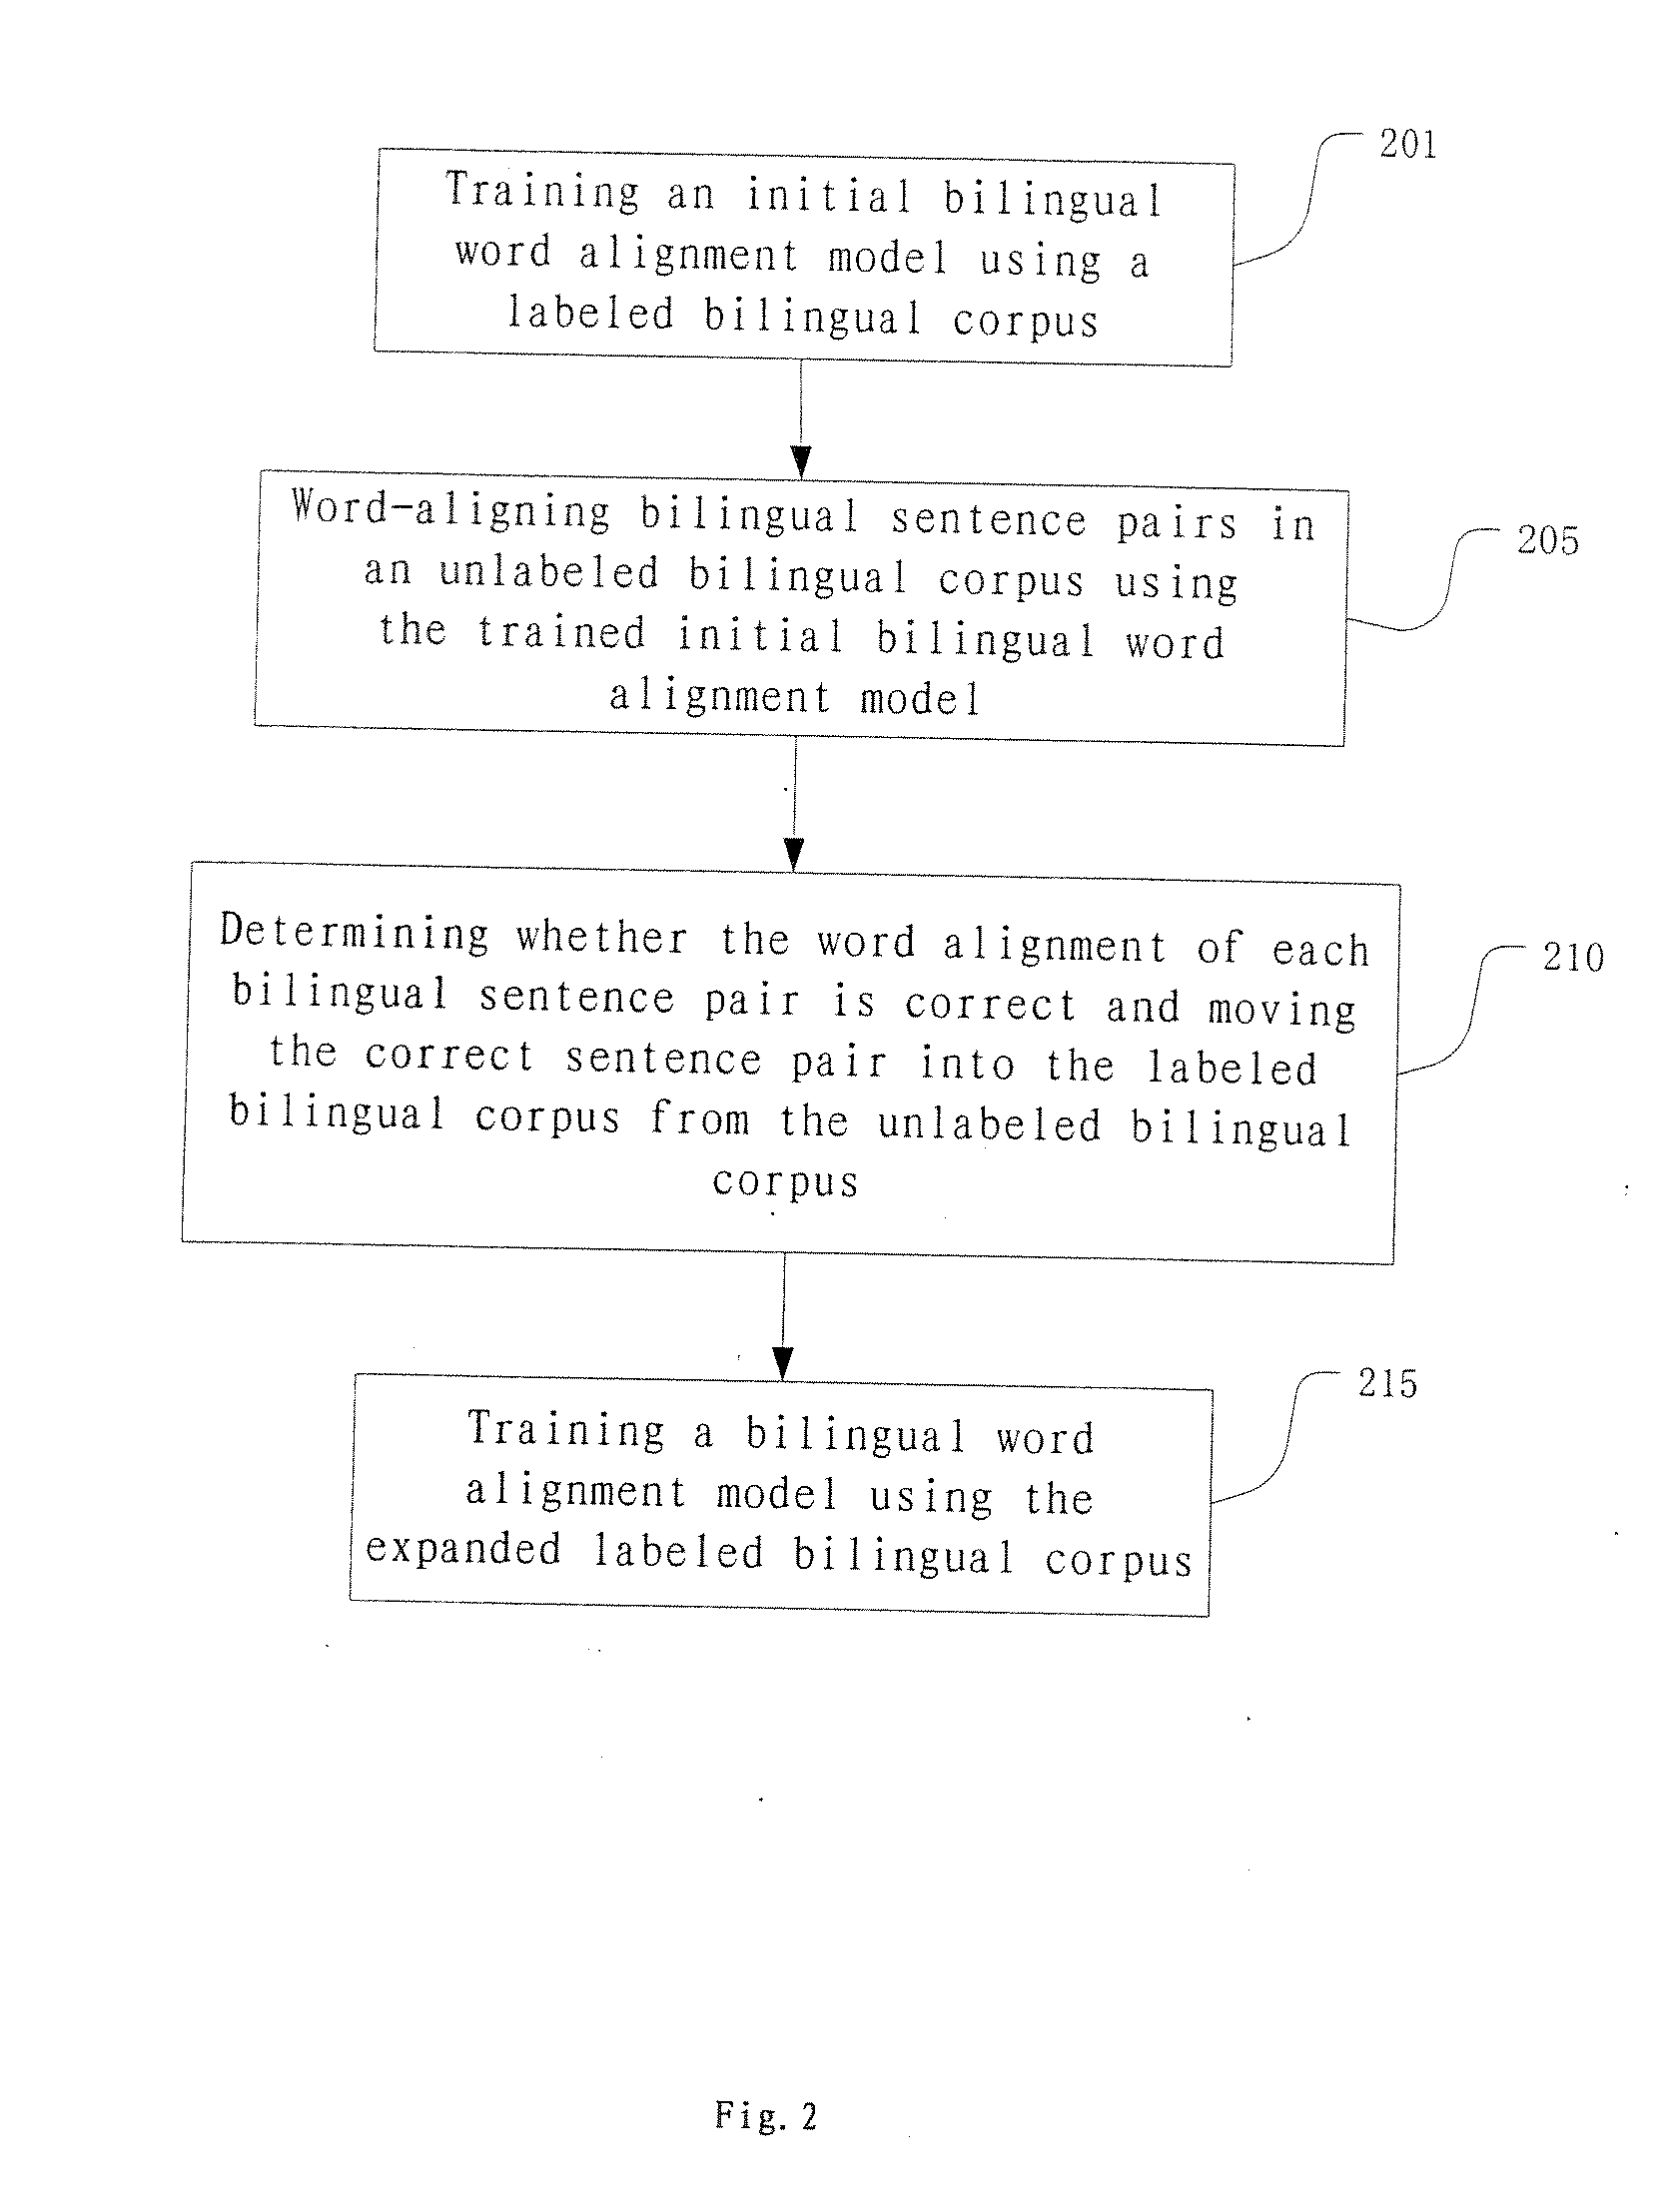 Method and apparatus for bilingual word alignment, method and apparatus for training bilingual word alignment model